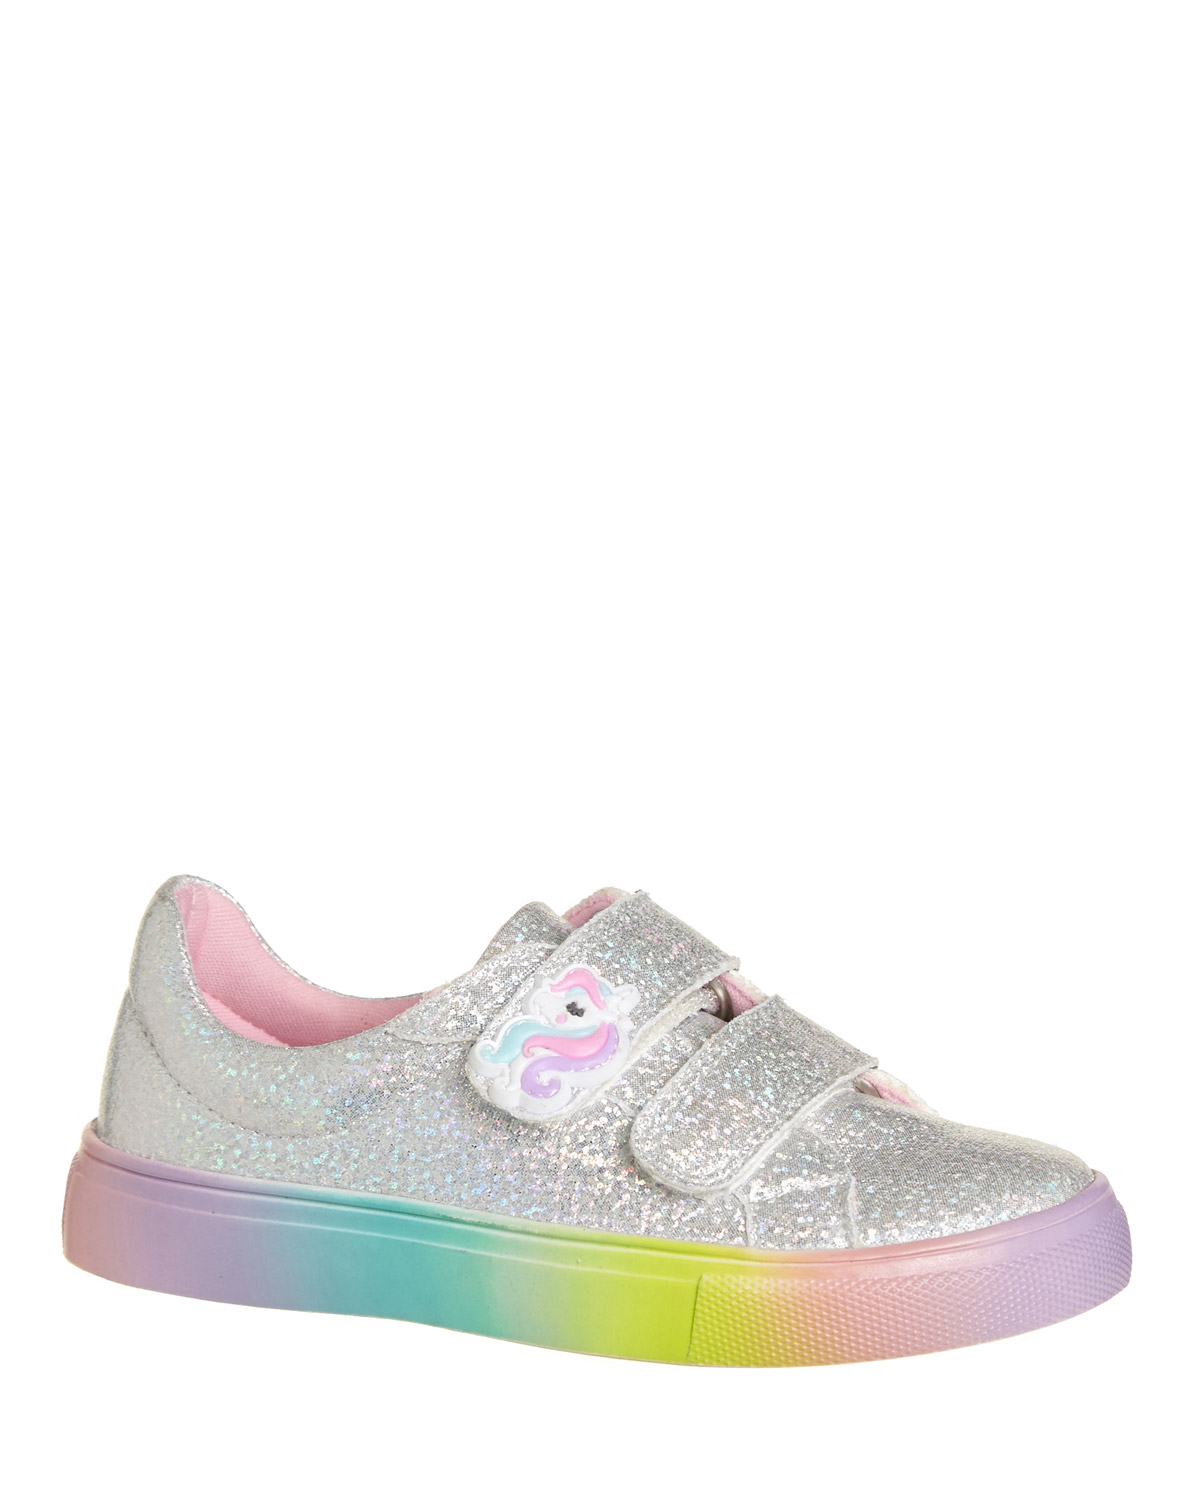 rainbow sole shoes